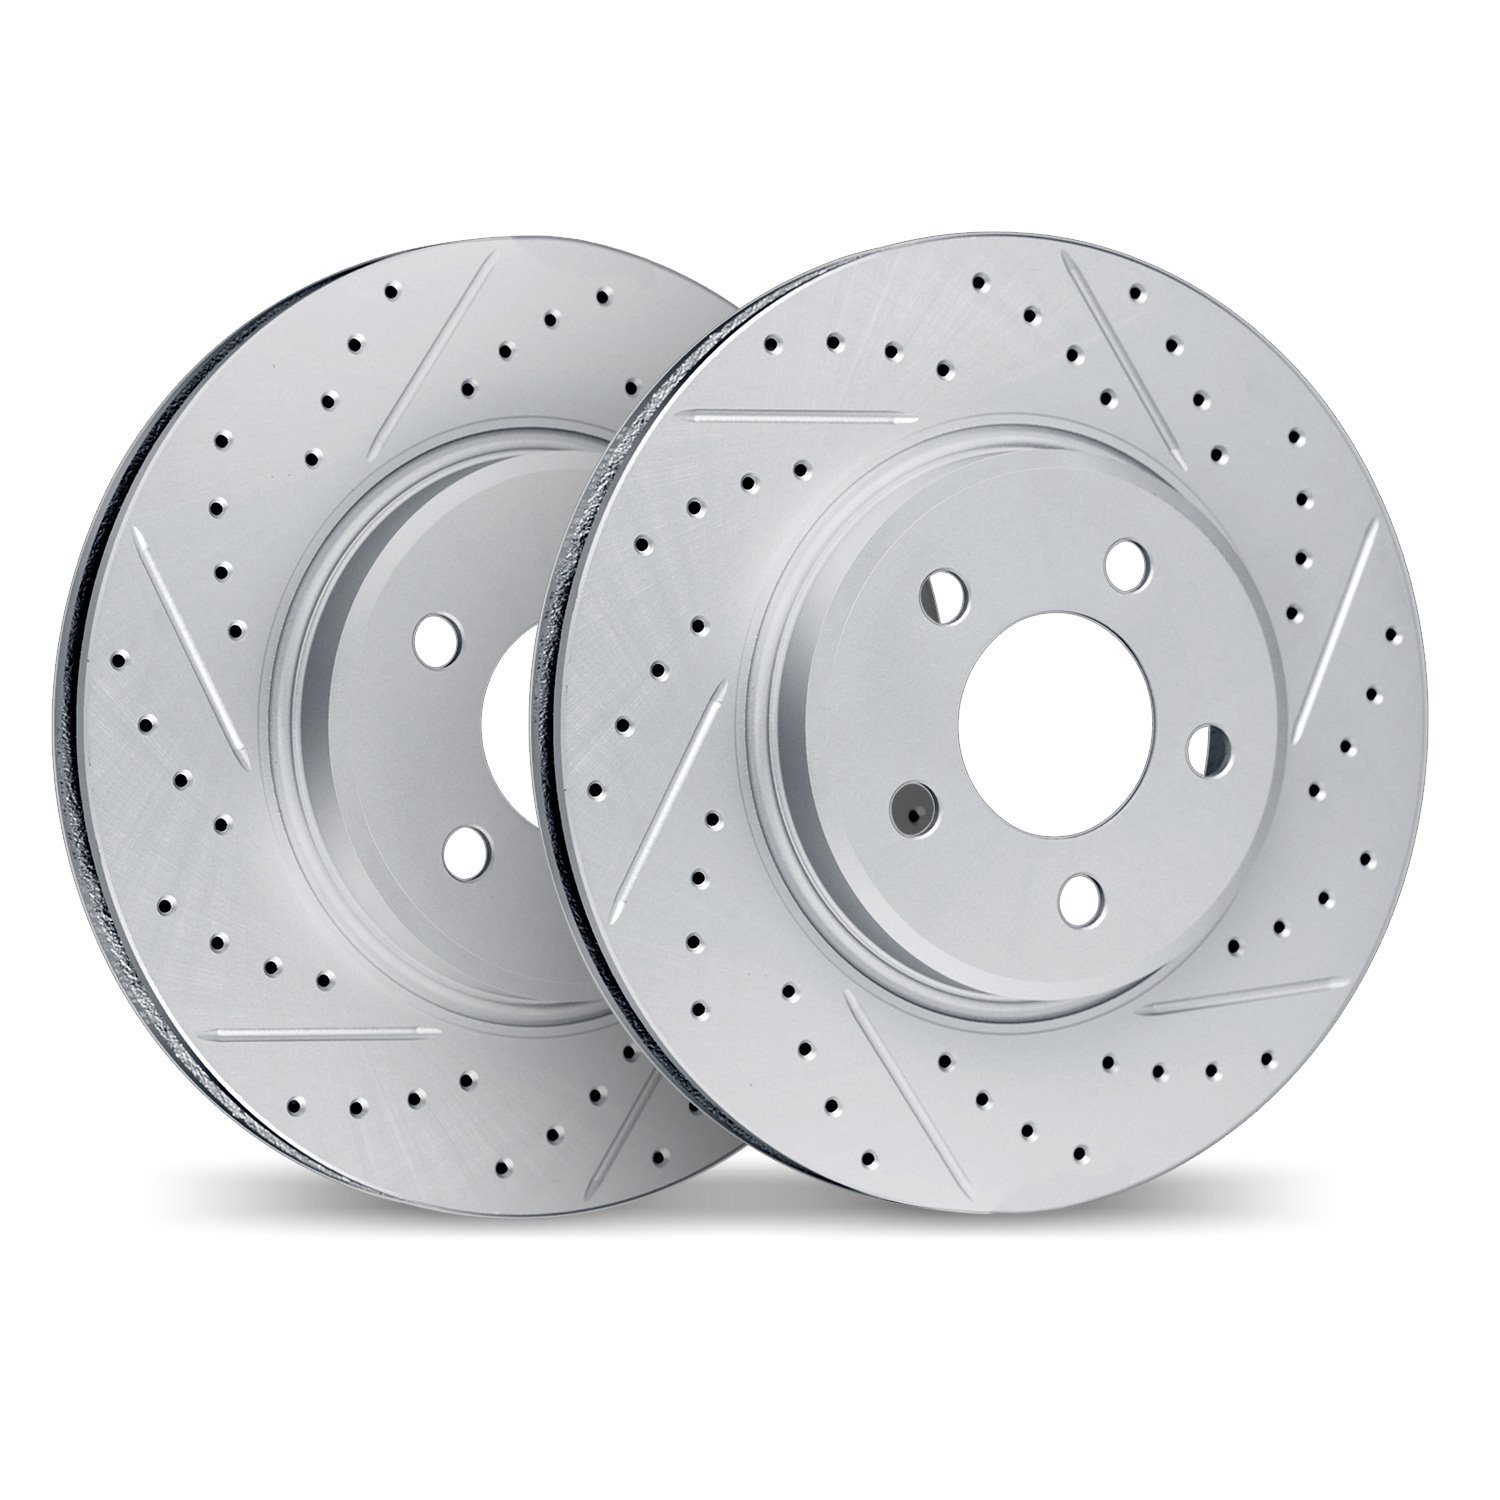 2002-31037 Geoperformance Drilled/Slotted Brake Rotors, 1995-2002 BMW, Position: Front